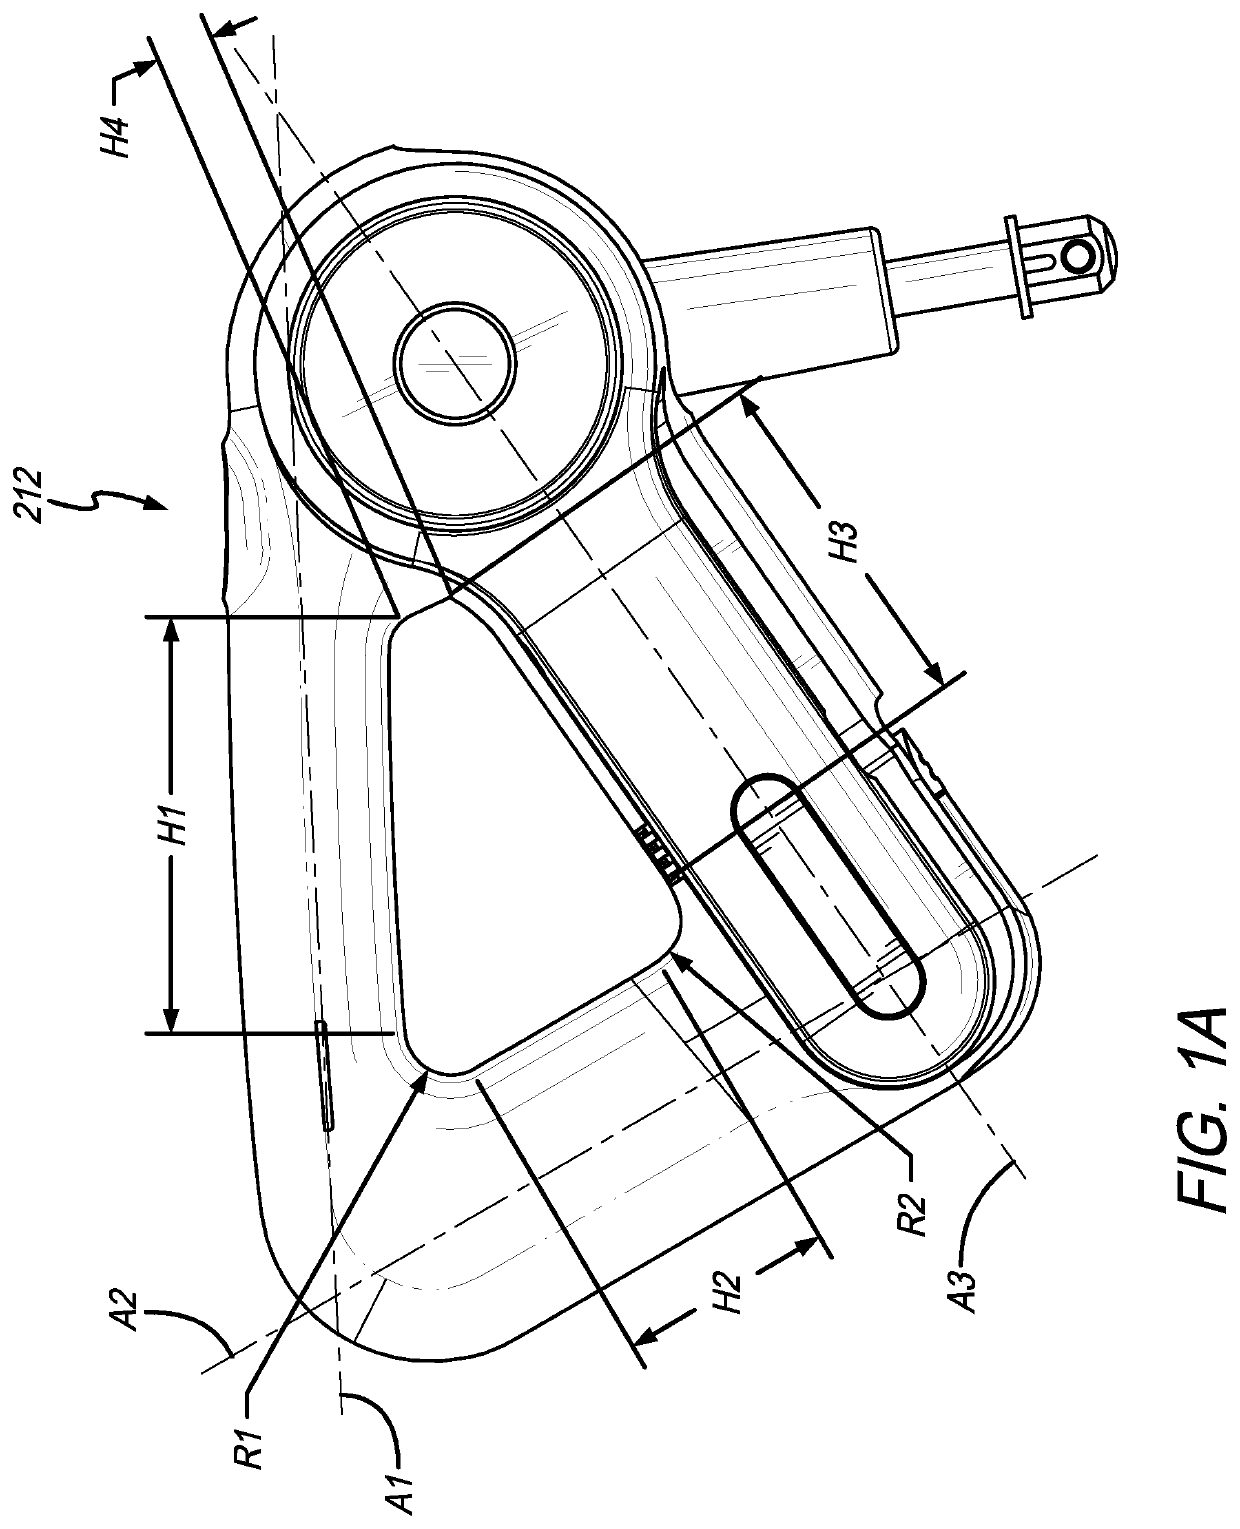 Percussive therapy device with active control